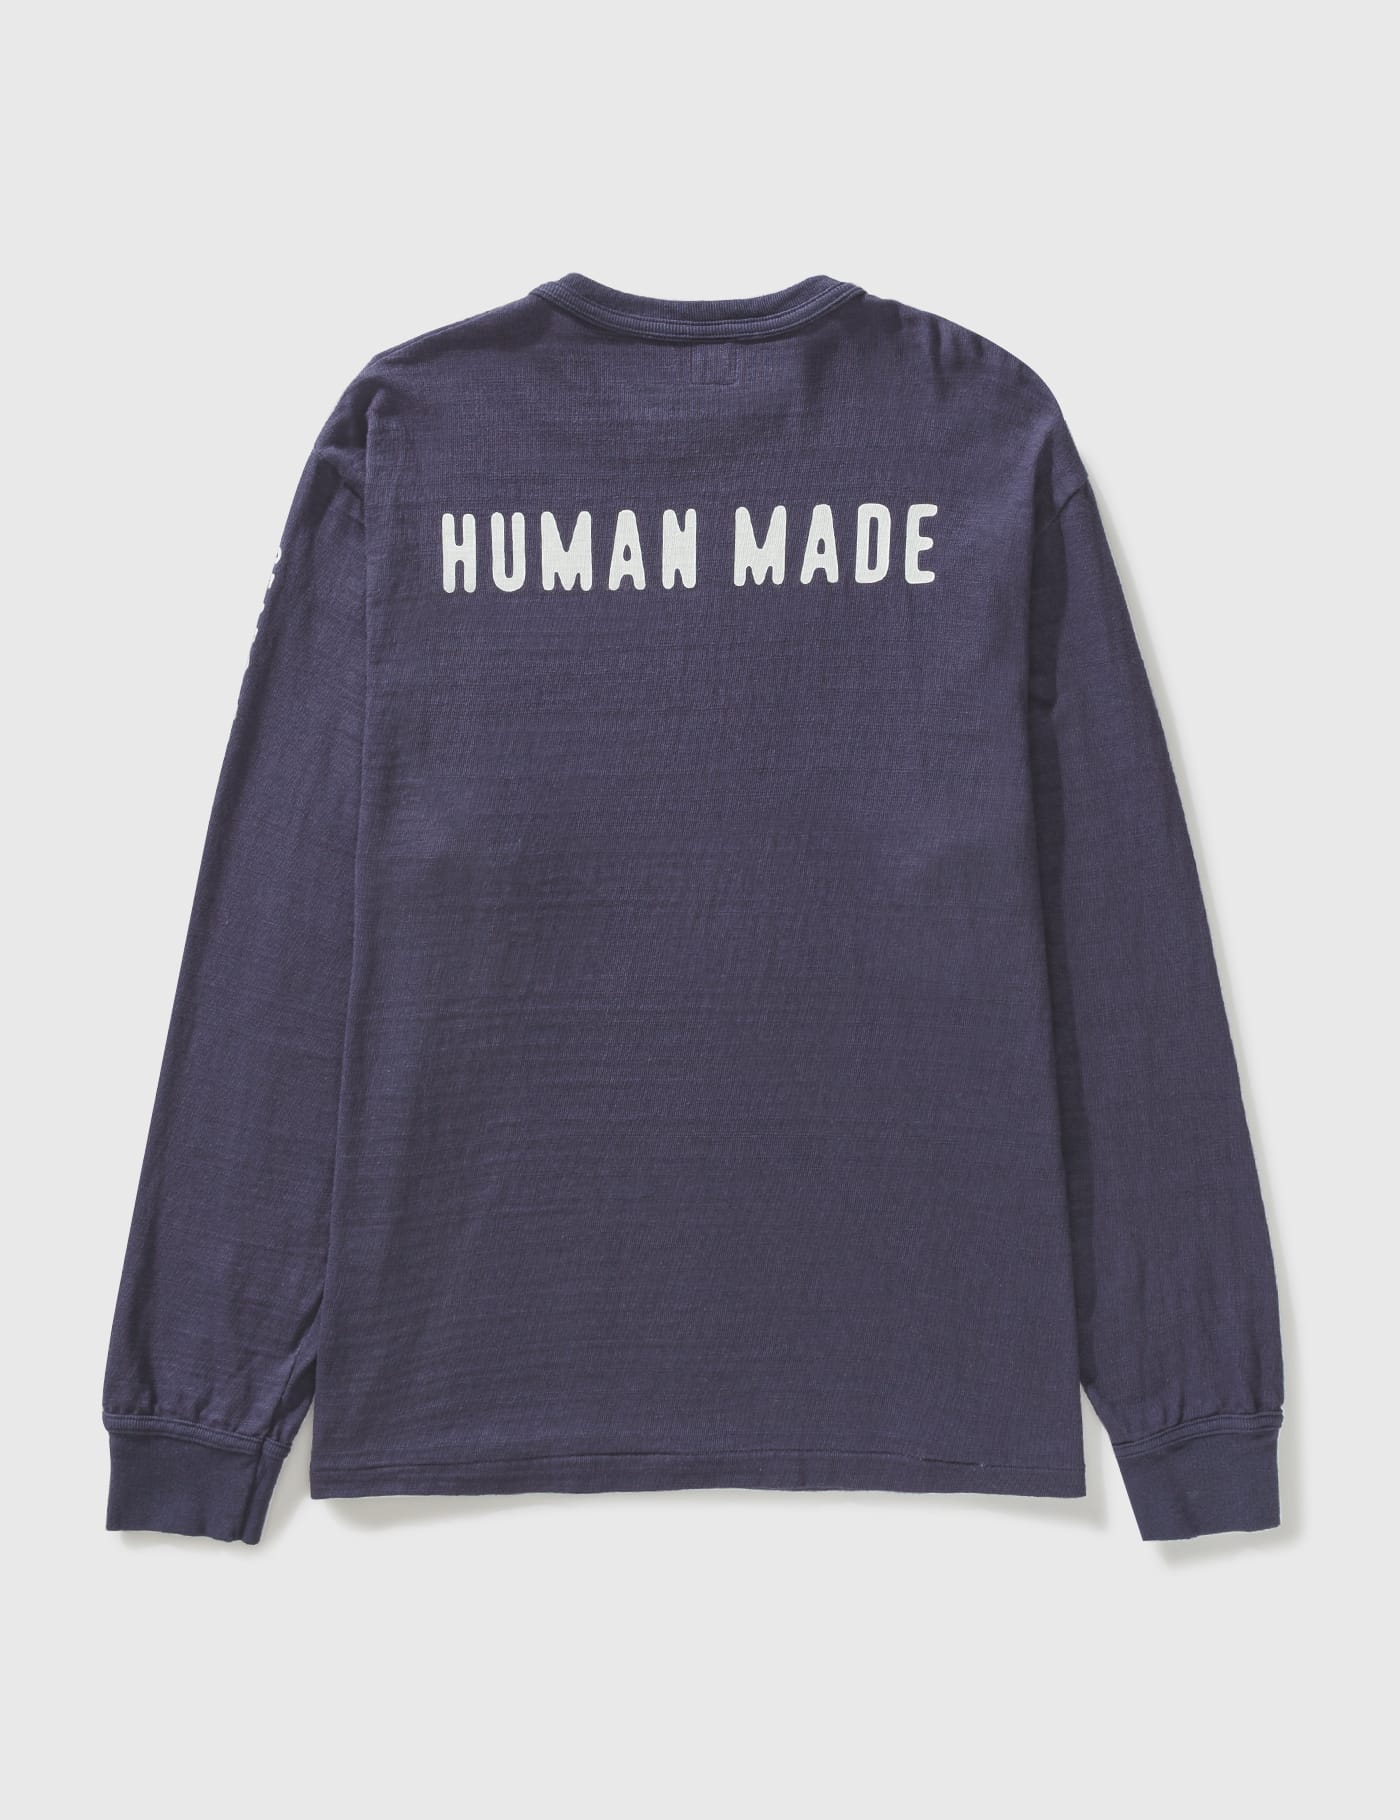 Human Made - Oxford B.D Shirt | HBX - Globally Curated Fashion and 